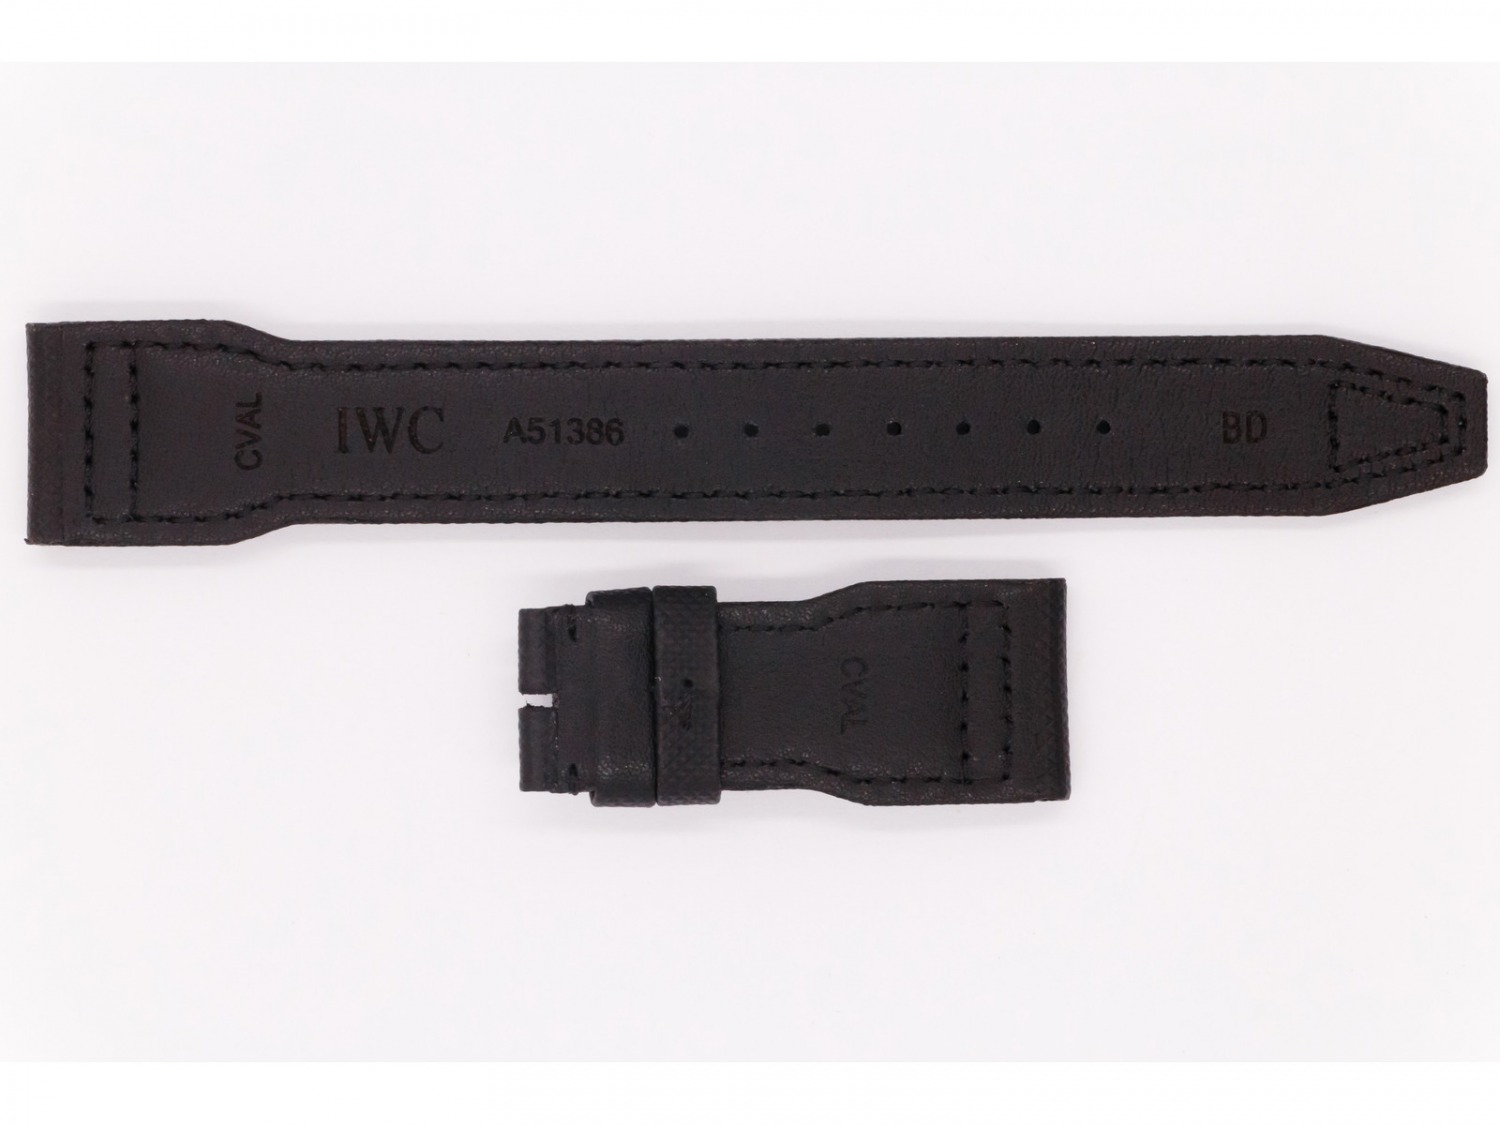 Leather and Rubber IWC Strap A51386, black